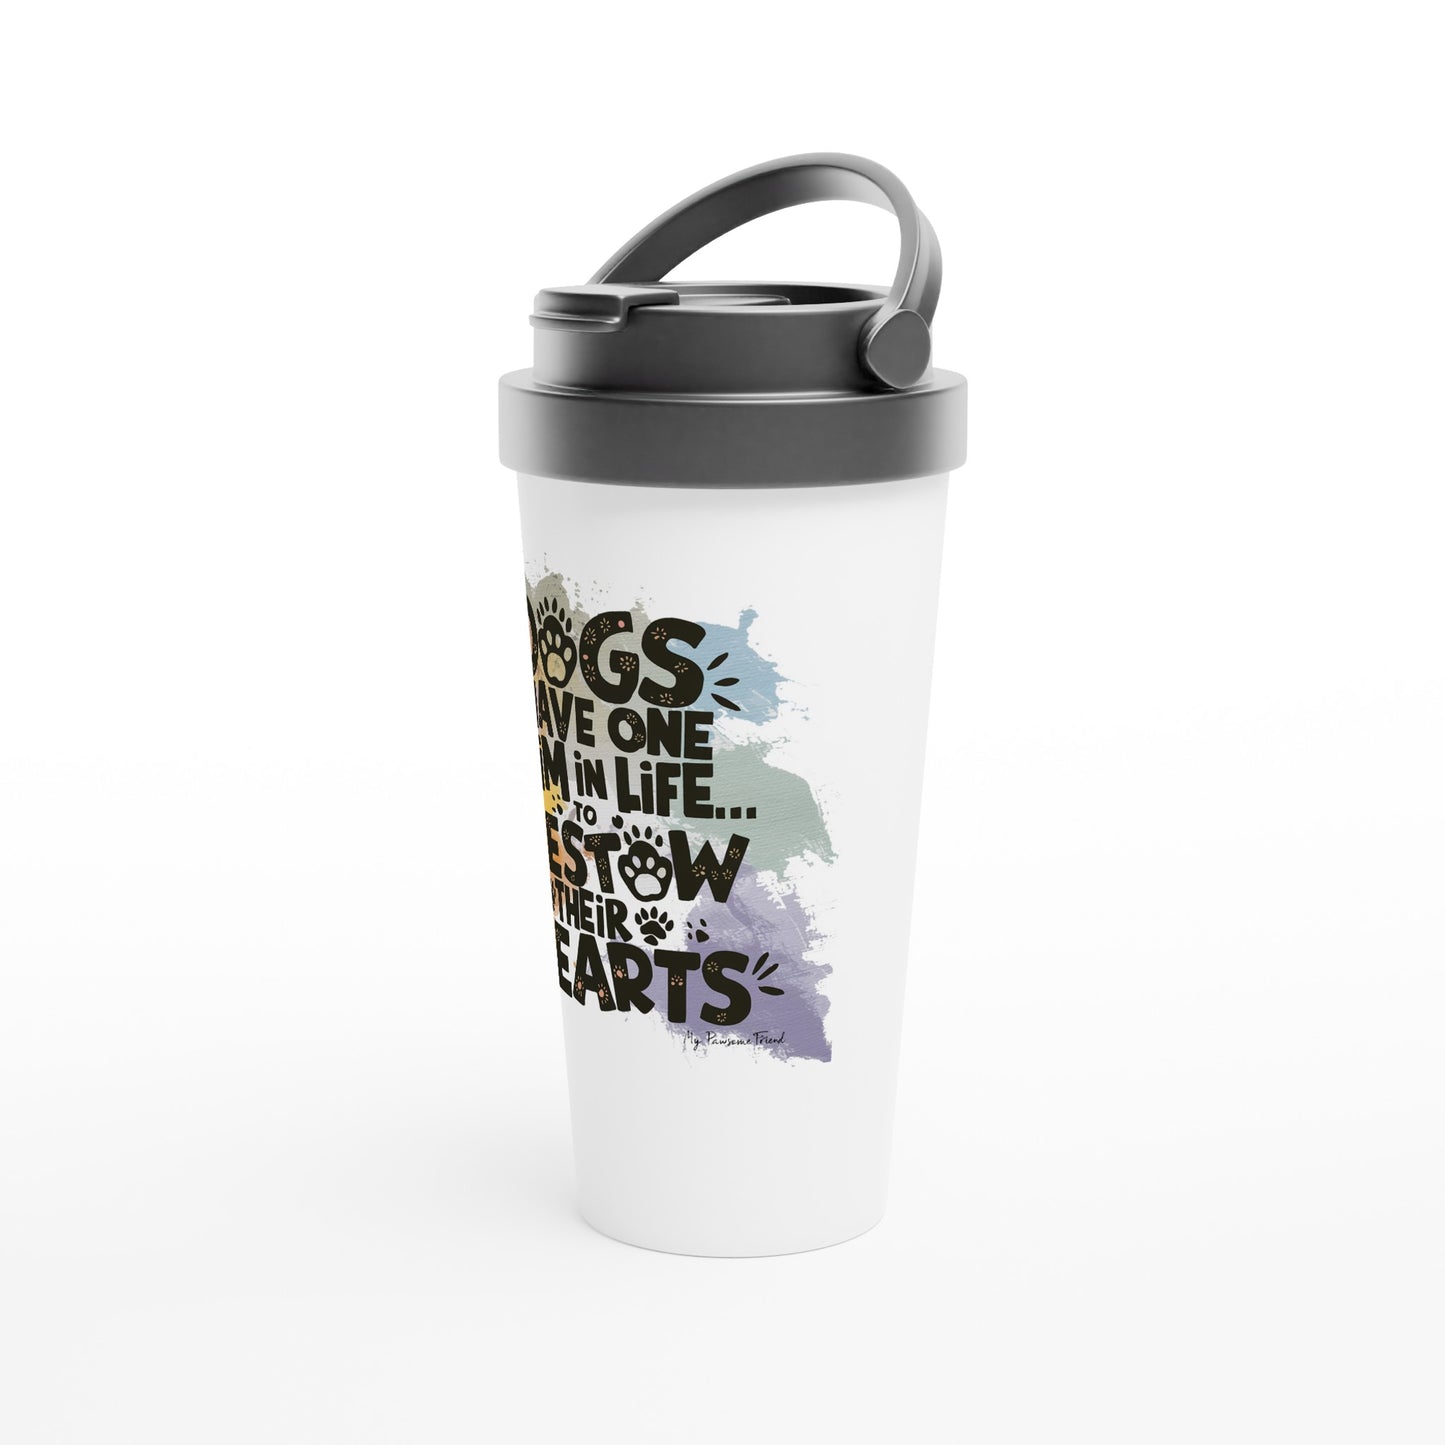 Right sideview of Travel Mug with the design: "Dogs Have One Aim in Life... To Bestow Their Hearts". The Travel Mug's color is white